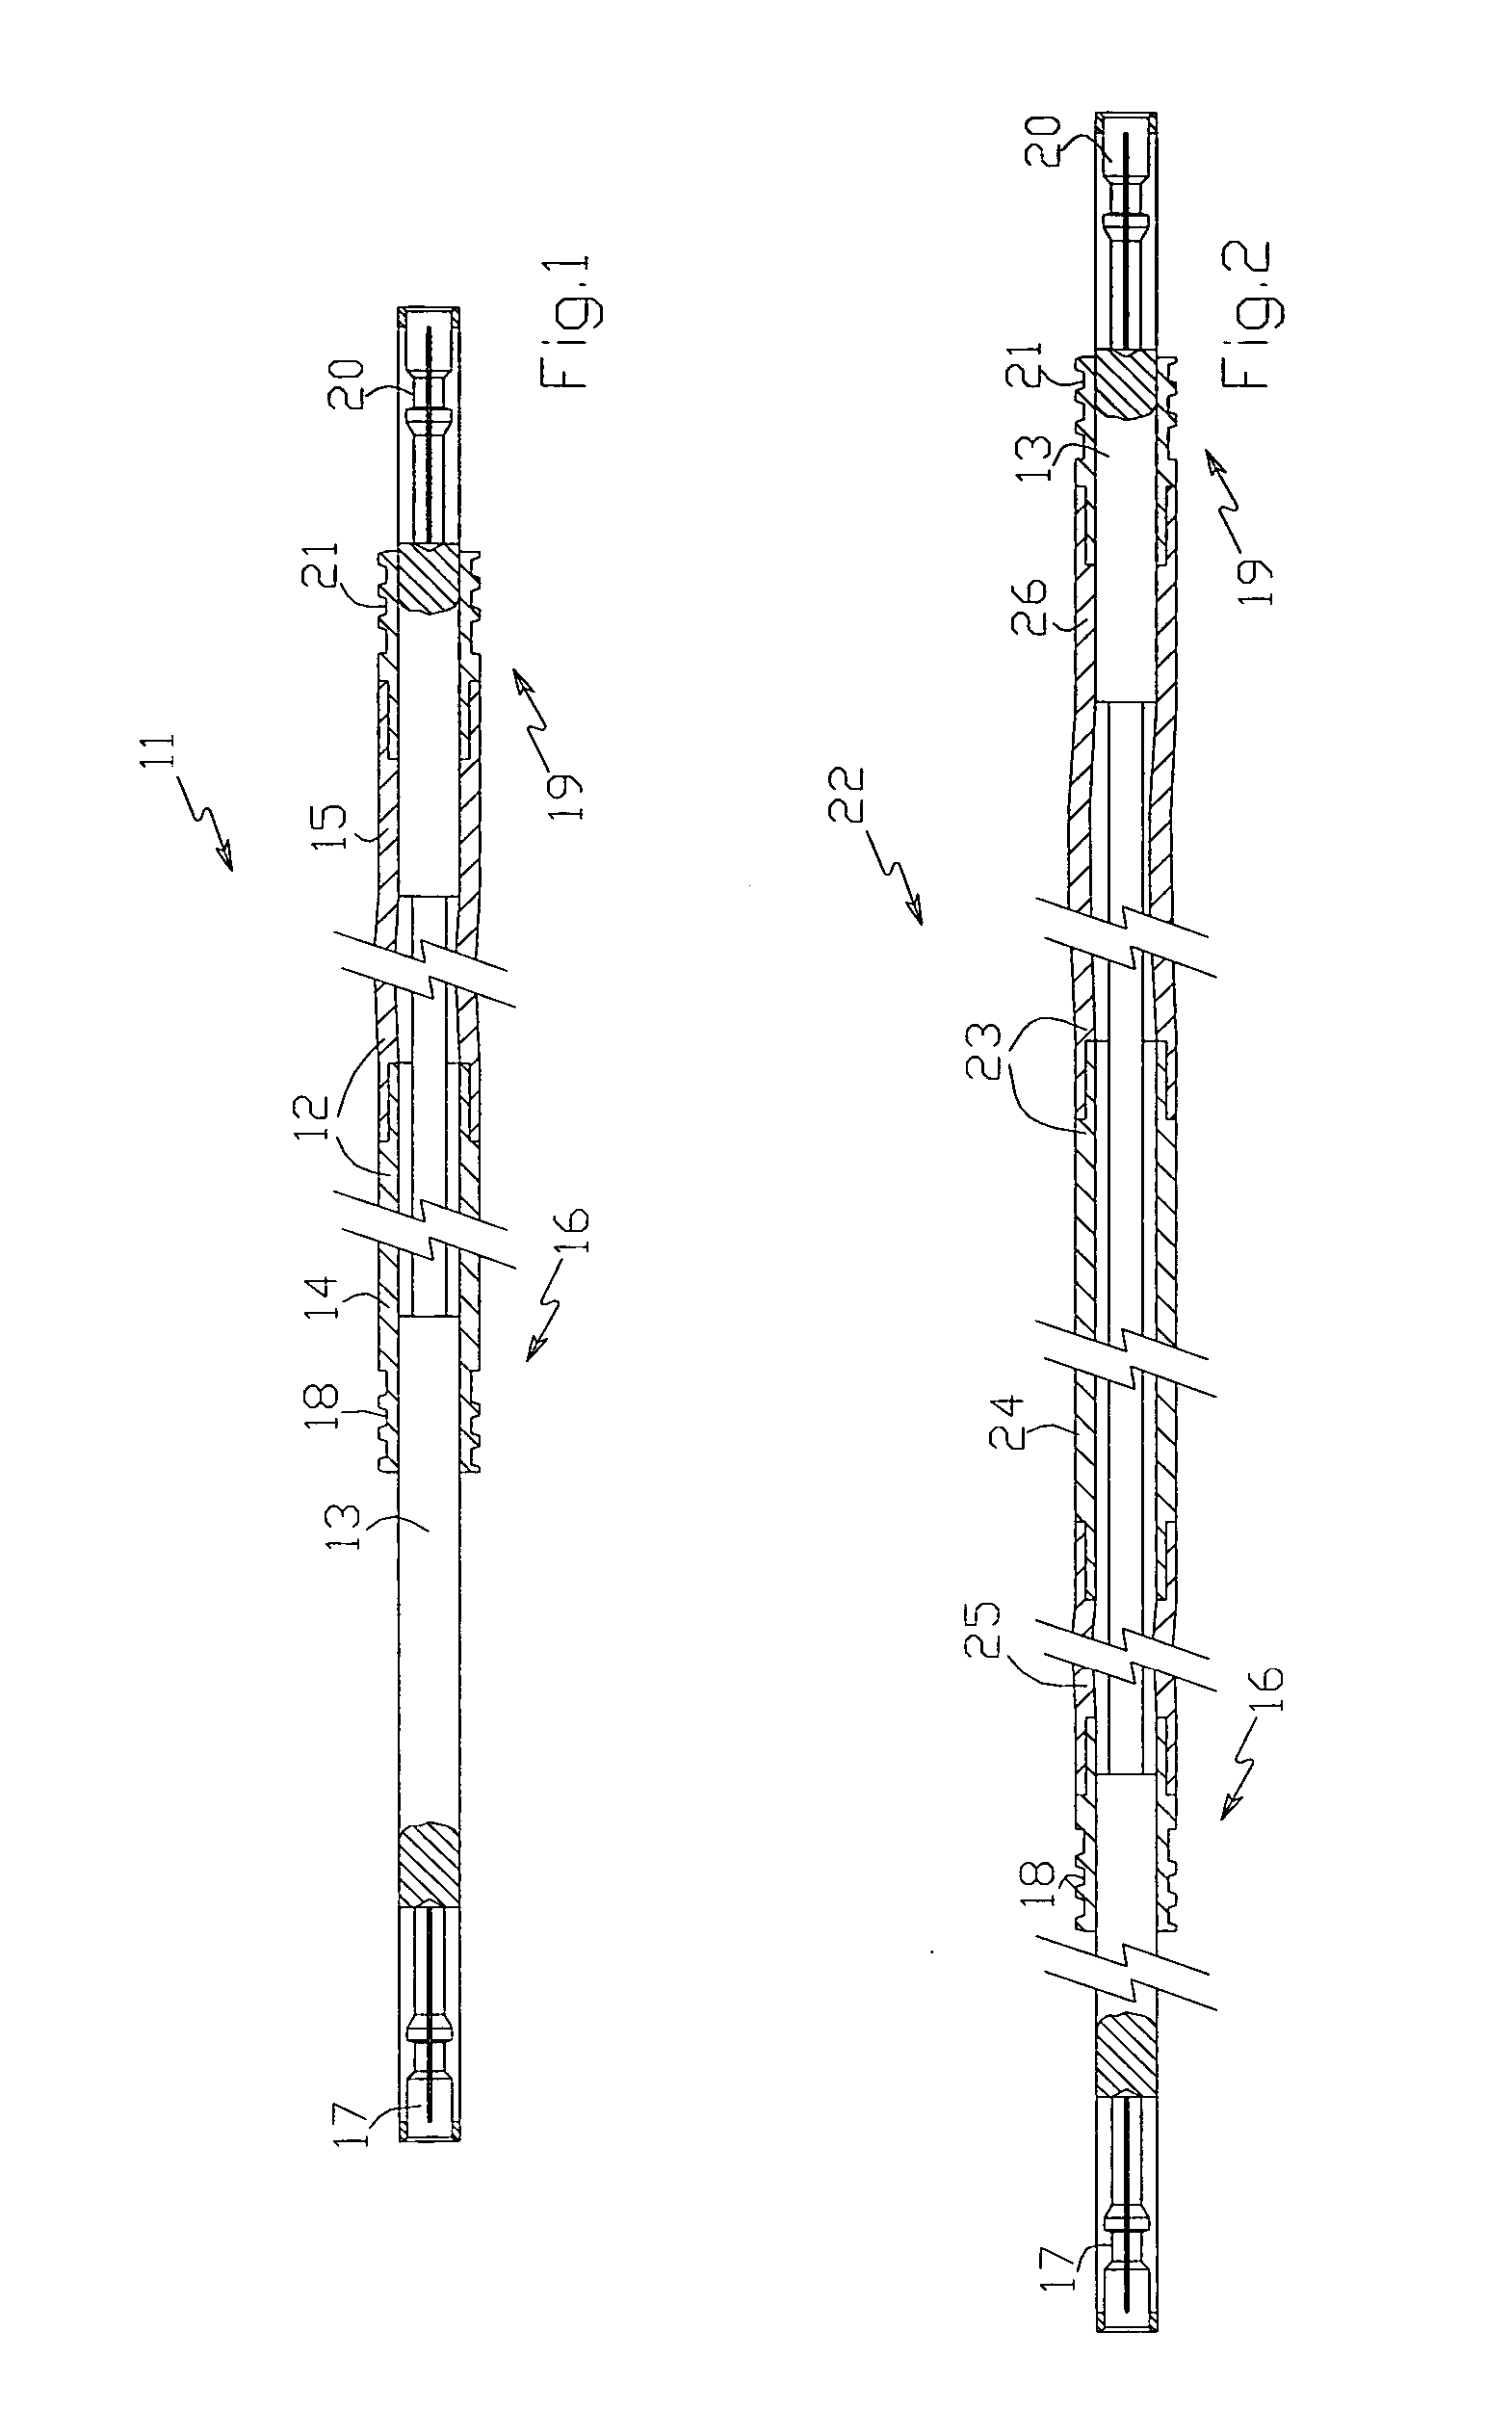 Surgical apparatus with remote drive